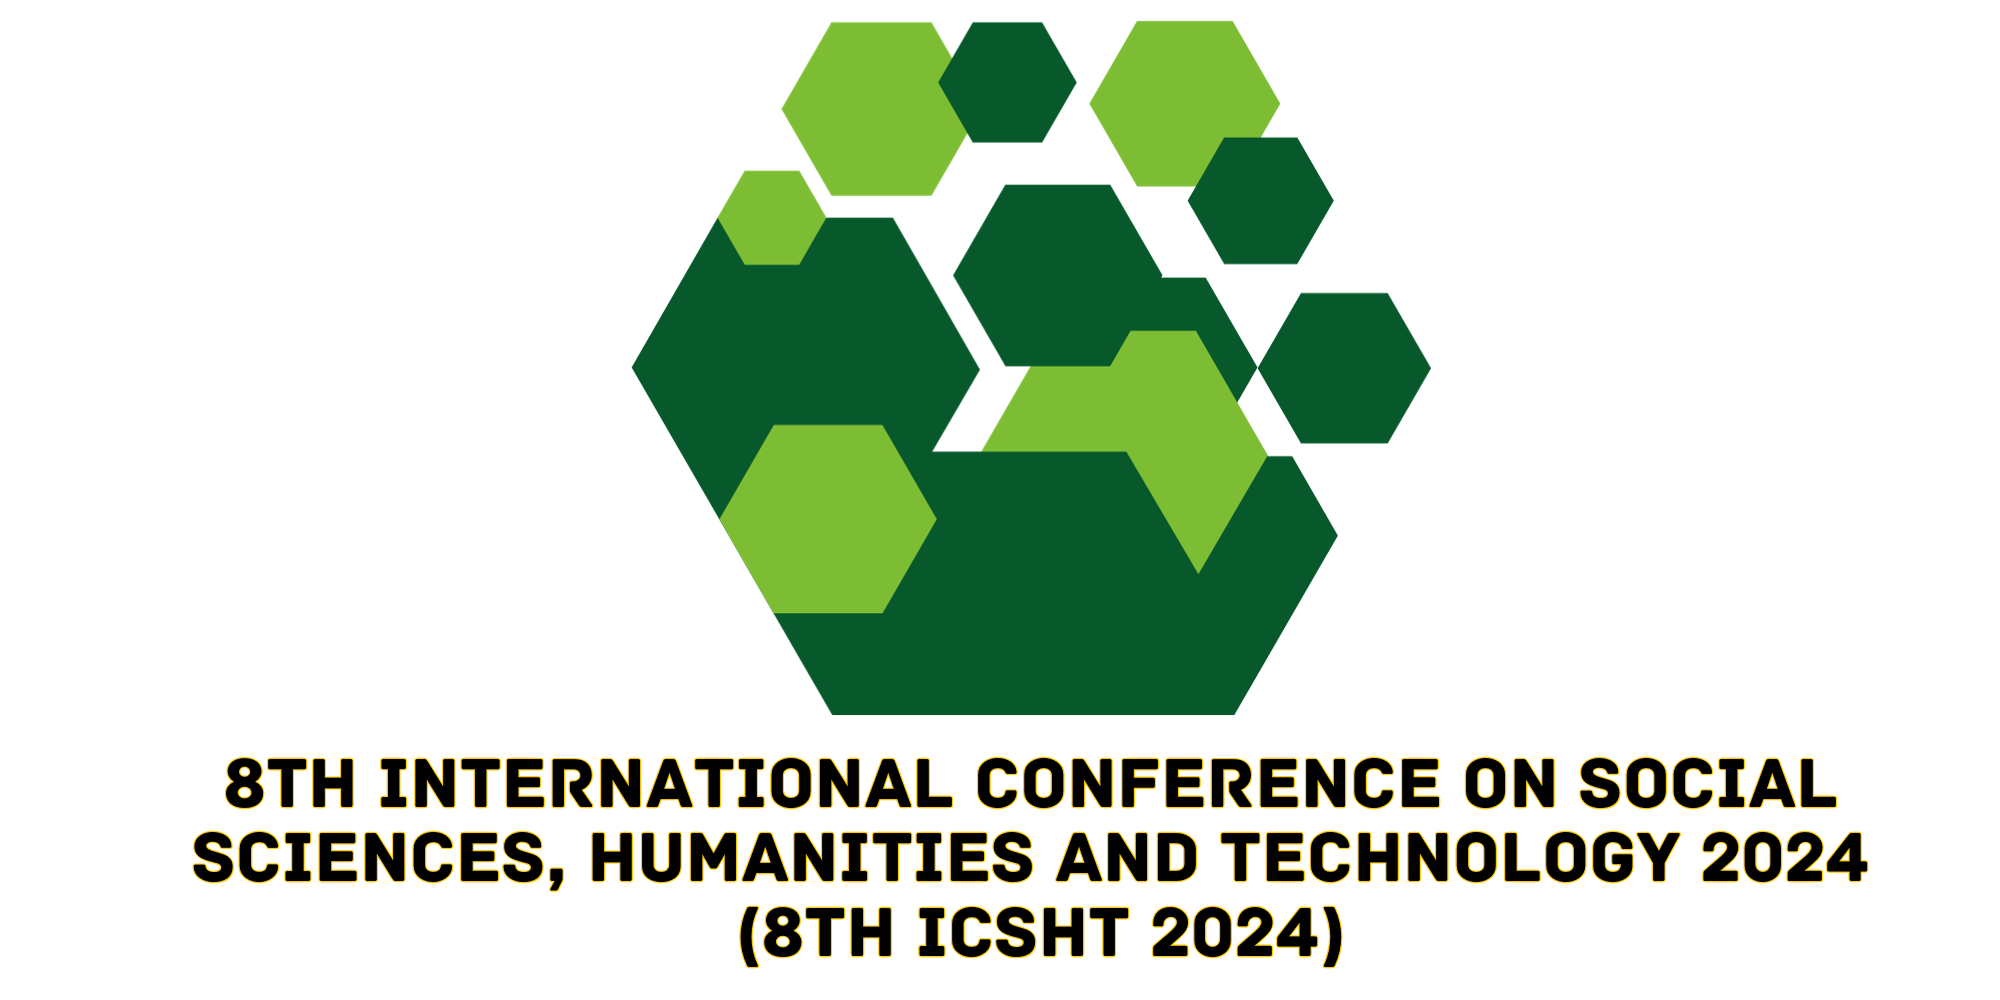 8th International Conference on Social Sciences, Humanities and Technology 2024 8th ICSHT 2024